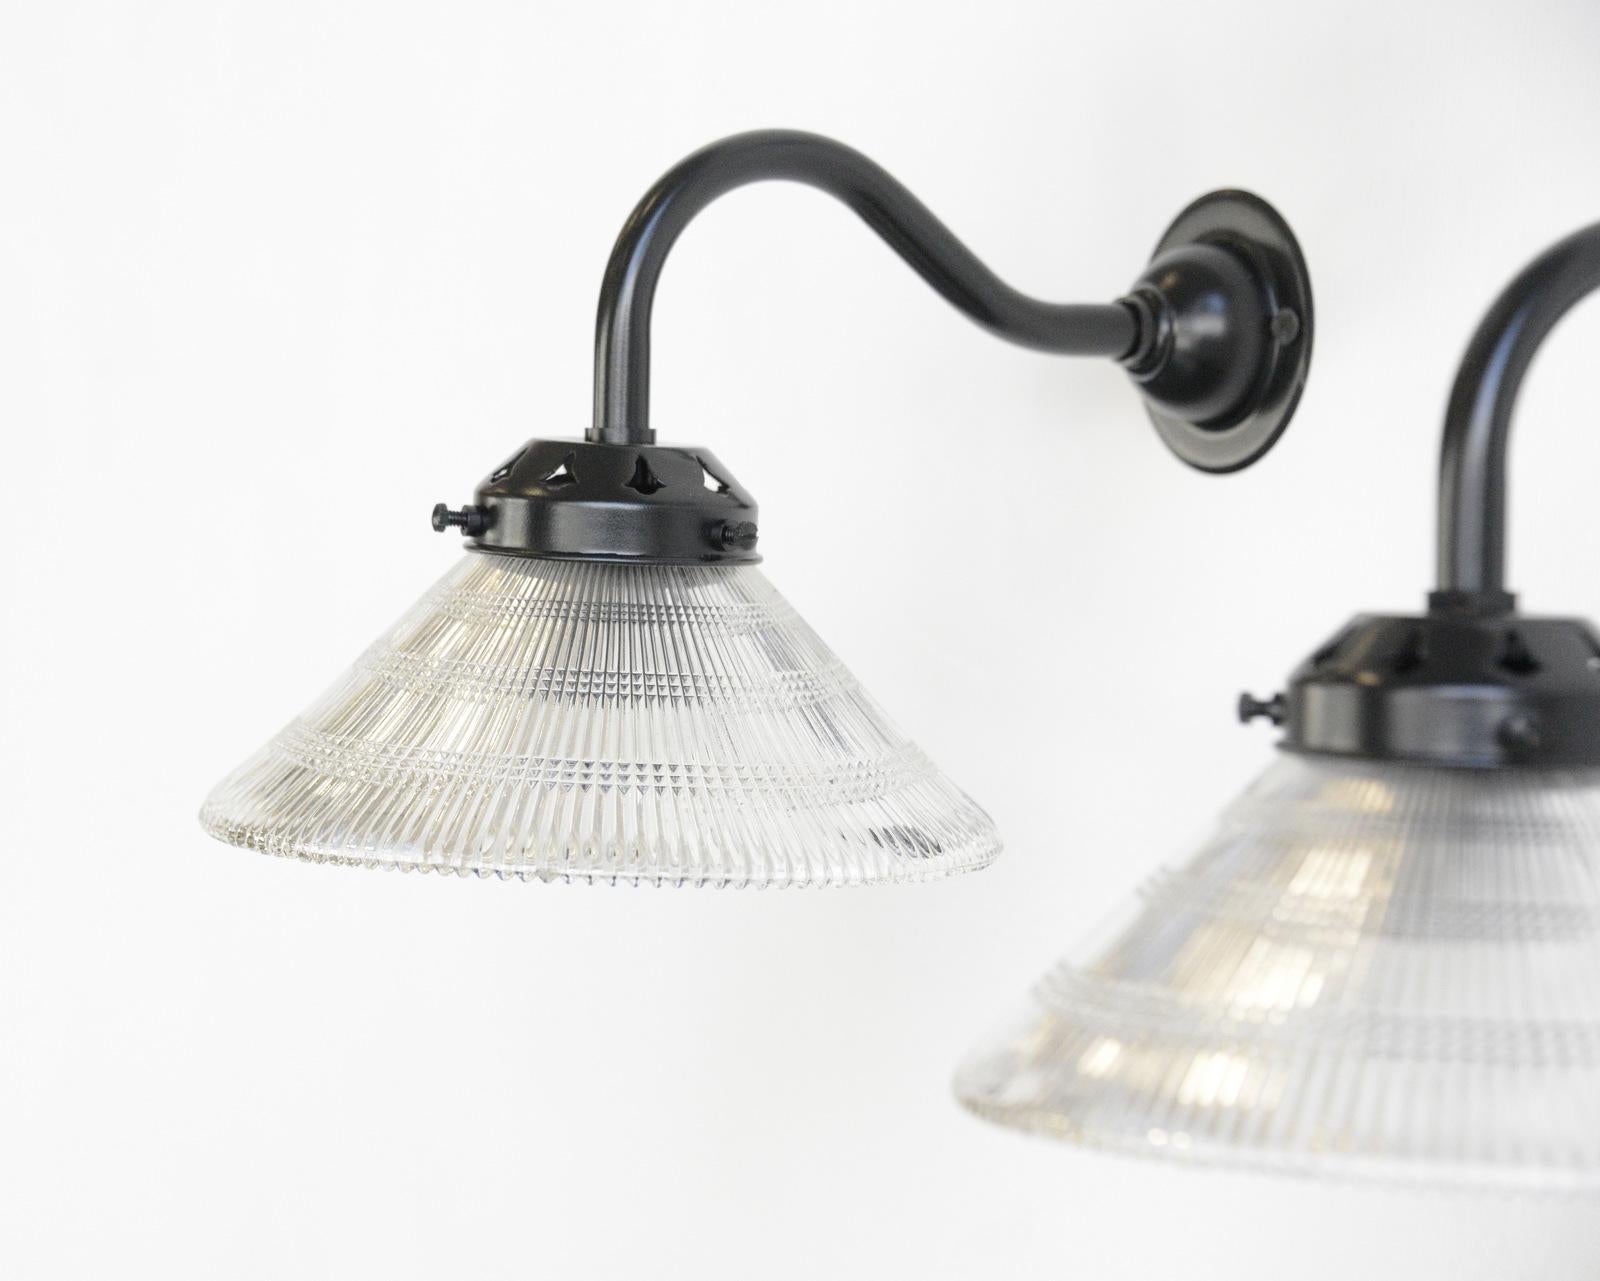 Wall-mounted Holophane lights, circa 1920s

- Price is per light (8 available)
- Prismatic glass shades
- Curved arms
- Takes E27 fitting bulbs
- Wire directly into the wall
- Dutch, 1920s
- Measures: 26cm deep x 17cm wide x 18cm